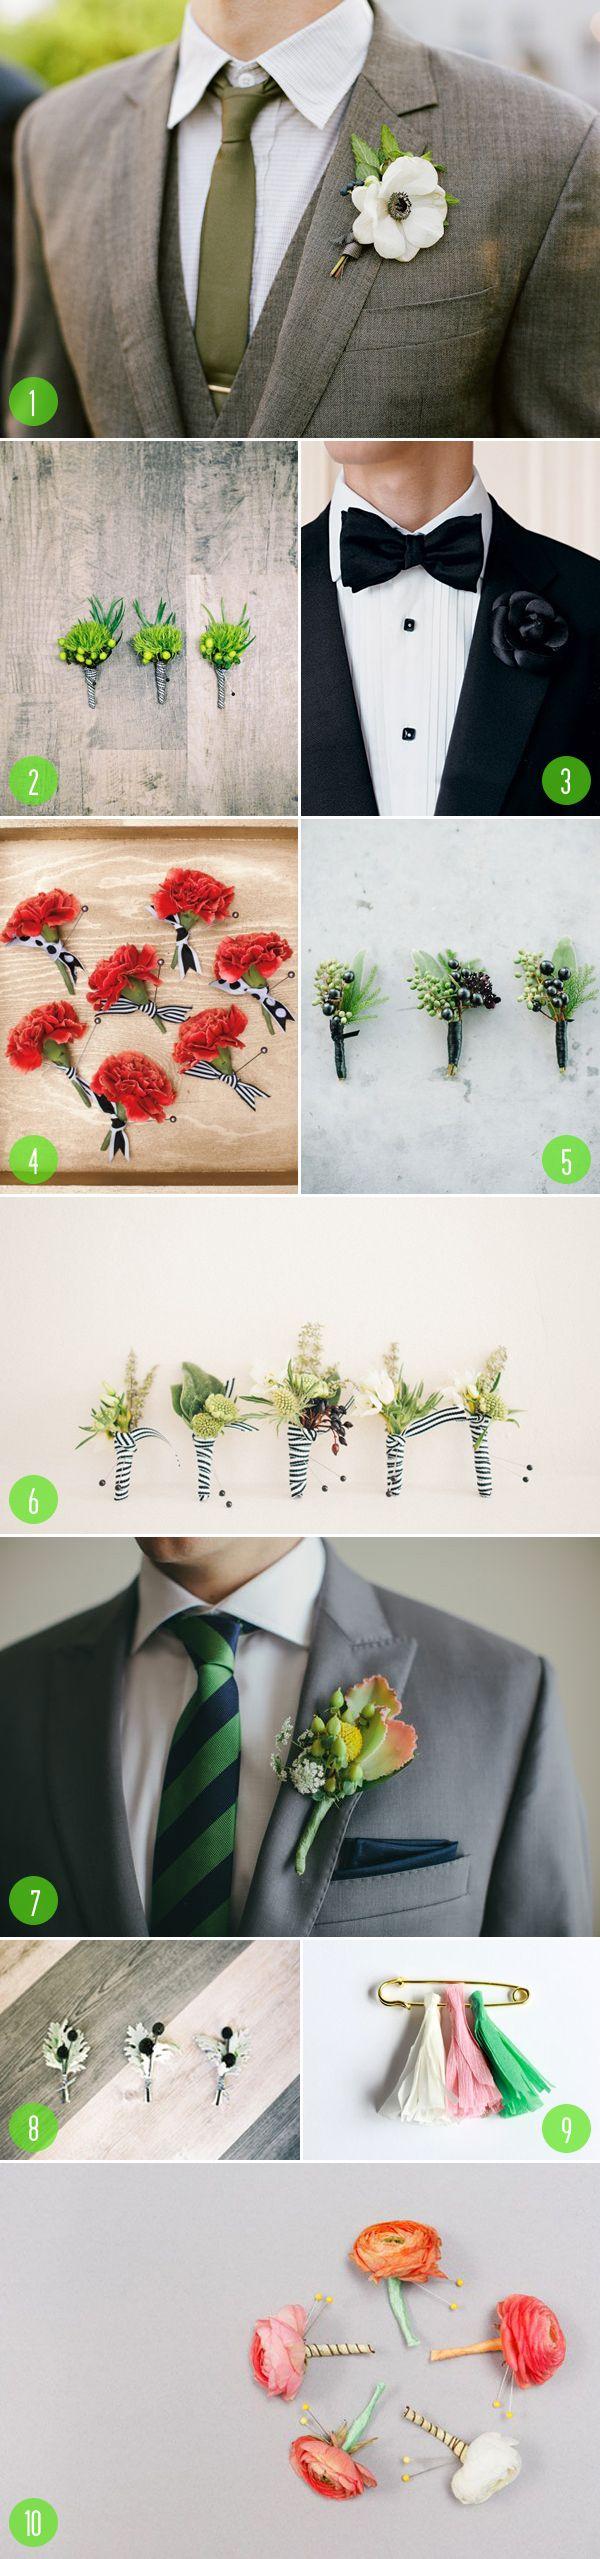 Mariage - Top 10: Boutonnieres